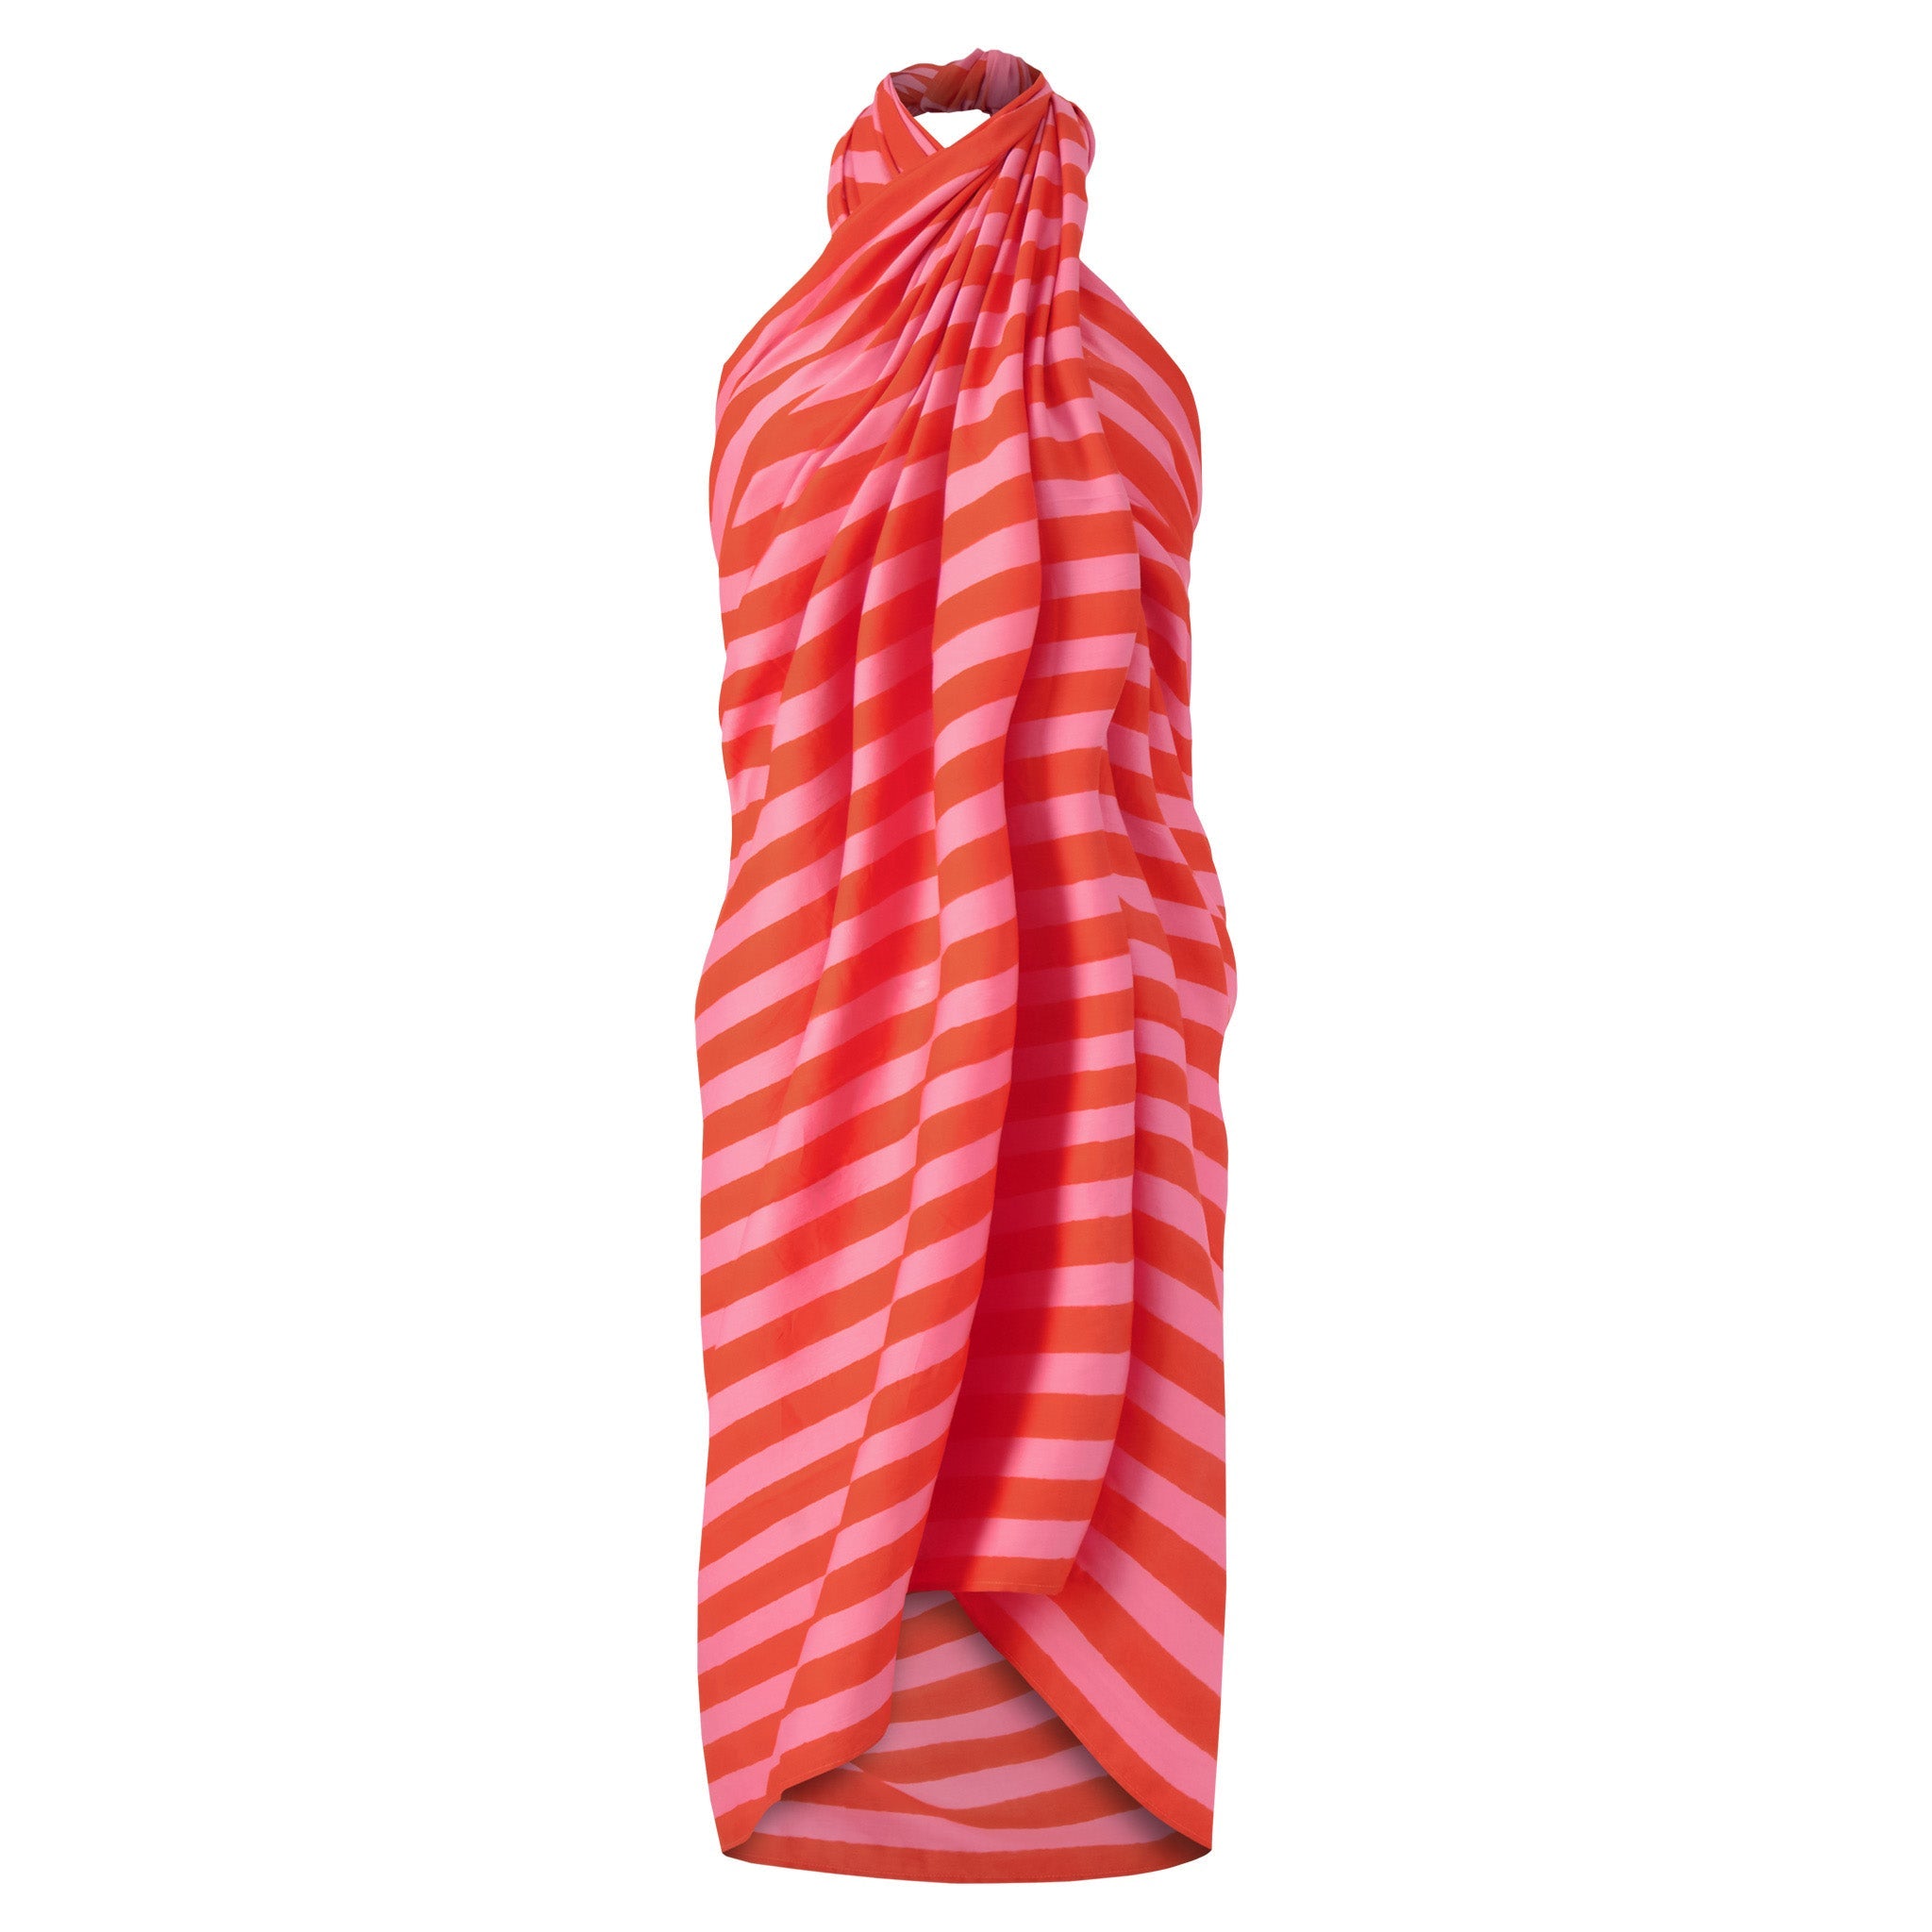 Anni Sarong with Tassels in Orange and Pink Cabana Stripe